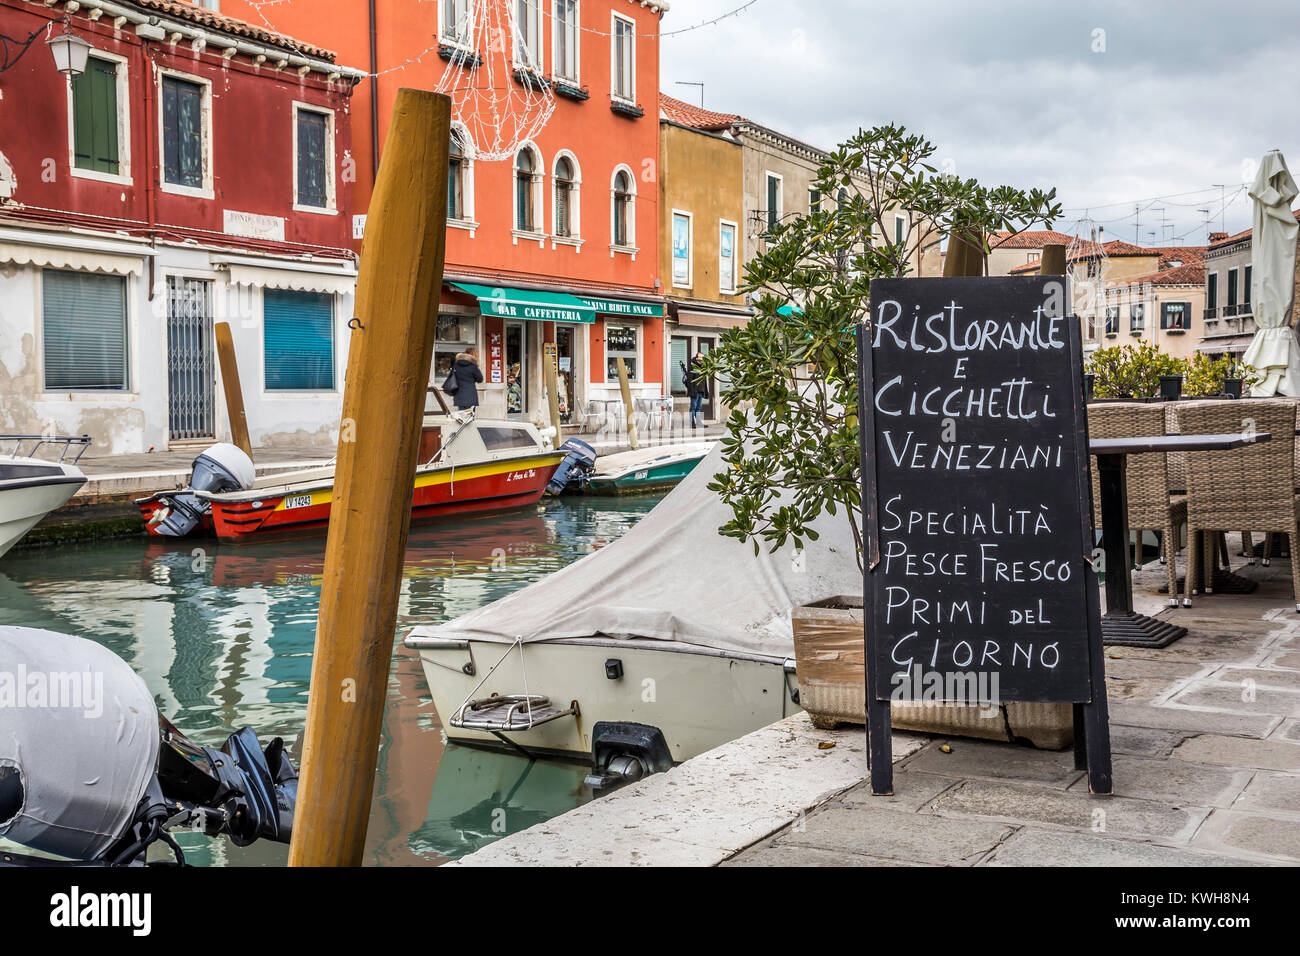 the picturesque island of Murano, famous for its glass production in the Venetian Lagoon on the Adriatic coast Stock Photo